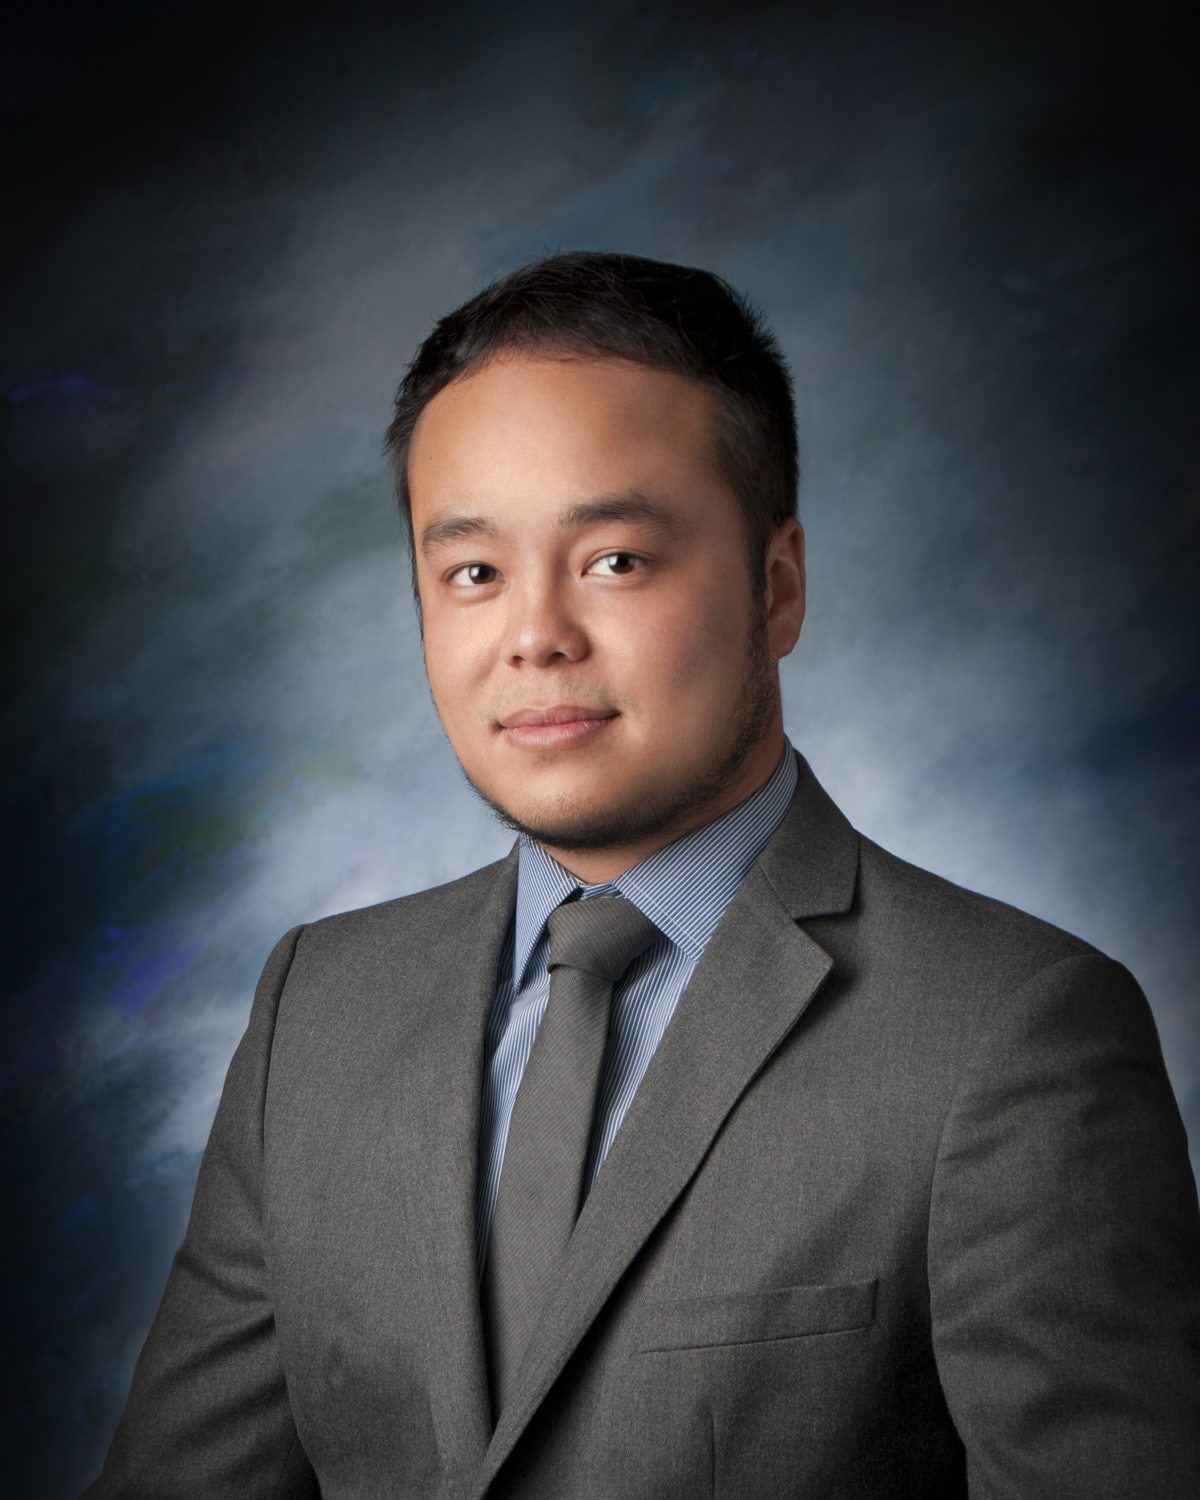 The law firm of Lipson, Neilson, Cole, Seltzer, Garin, P.C. announced that attorney Eric Tran has joined the firm’s Las Vegas office.